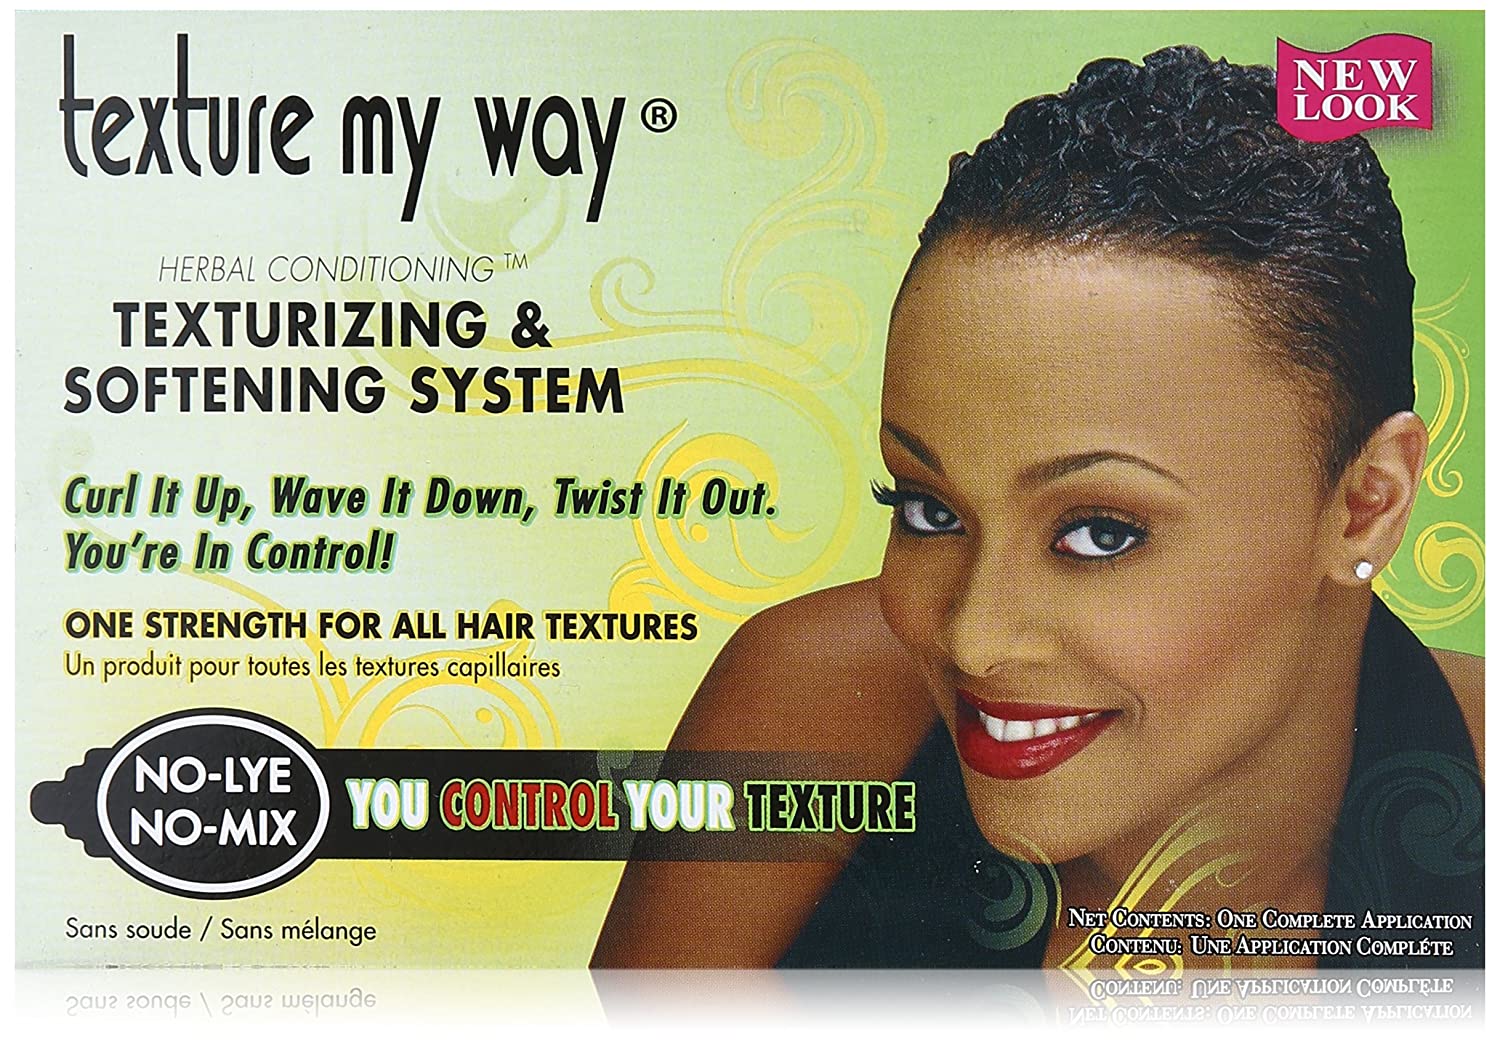 Organics My Way No-Lye Organic Conditioning Texturizing System Find Your New Look Today!